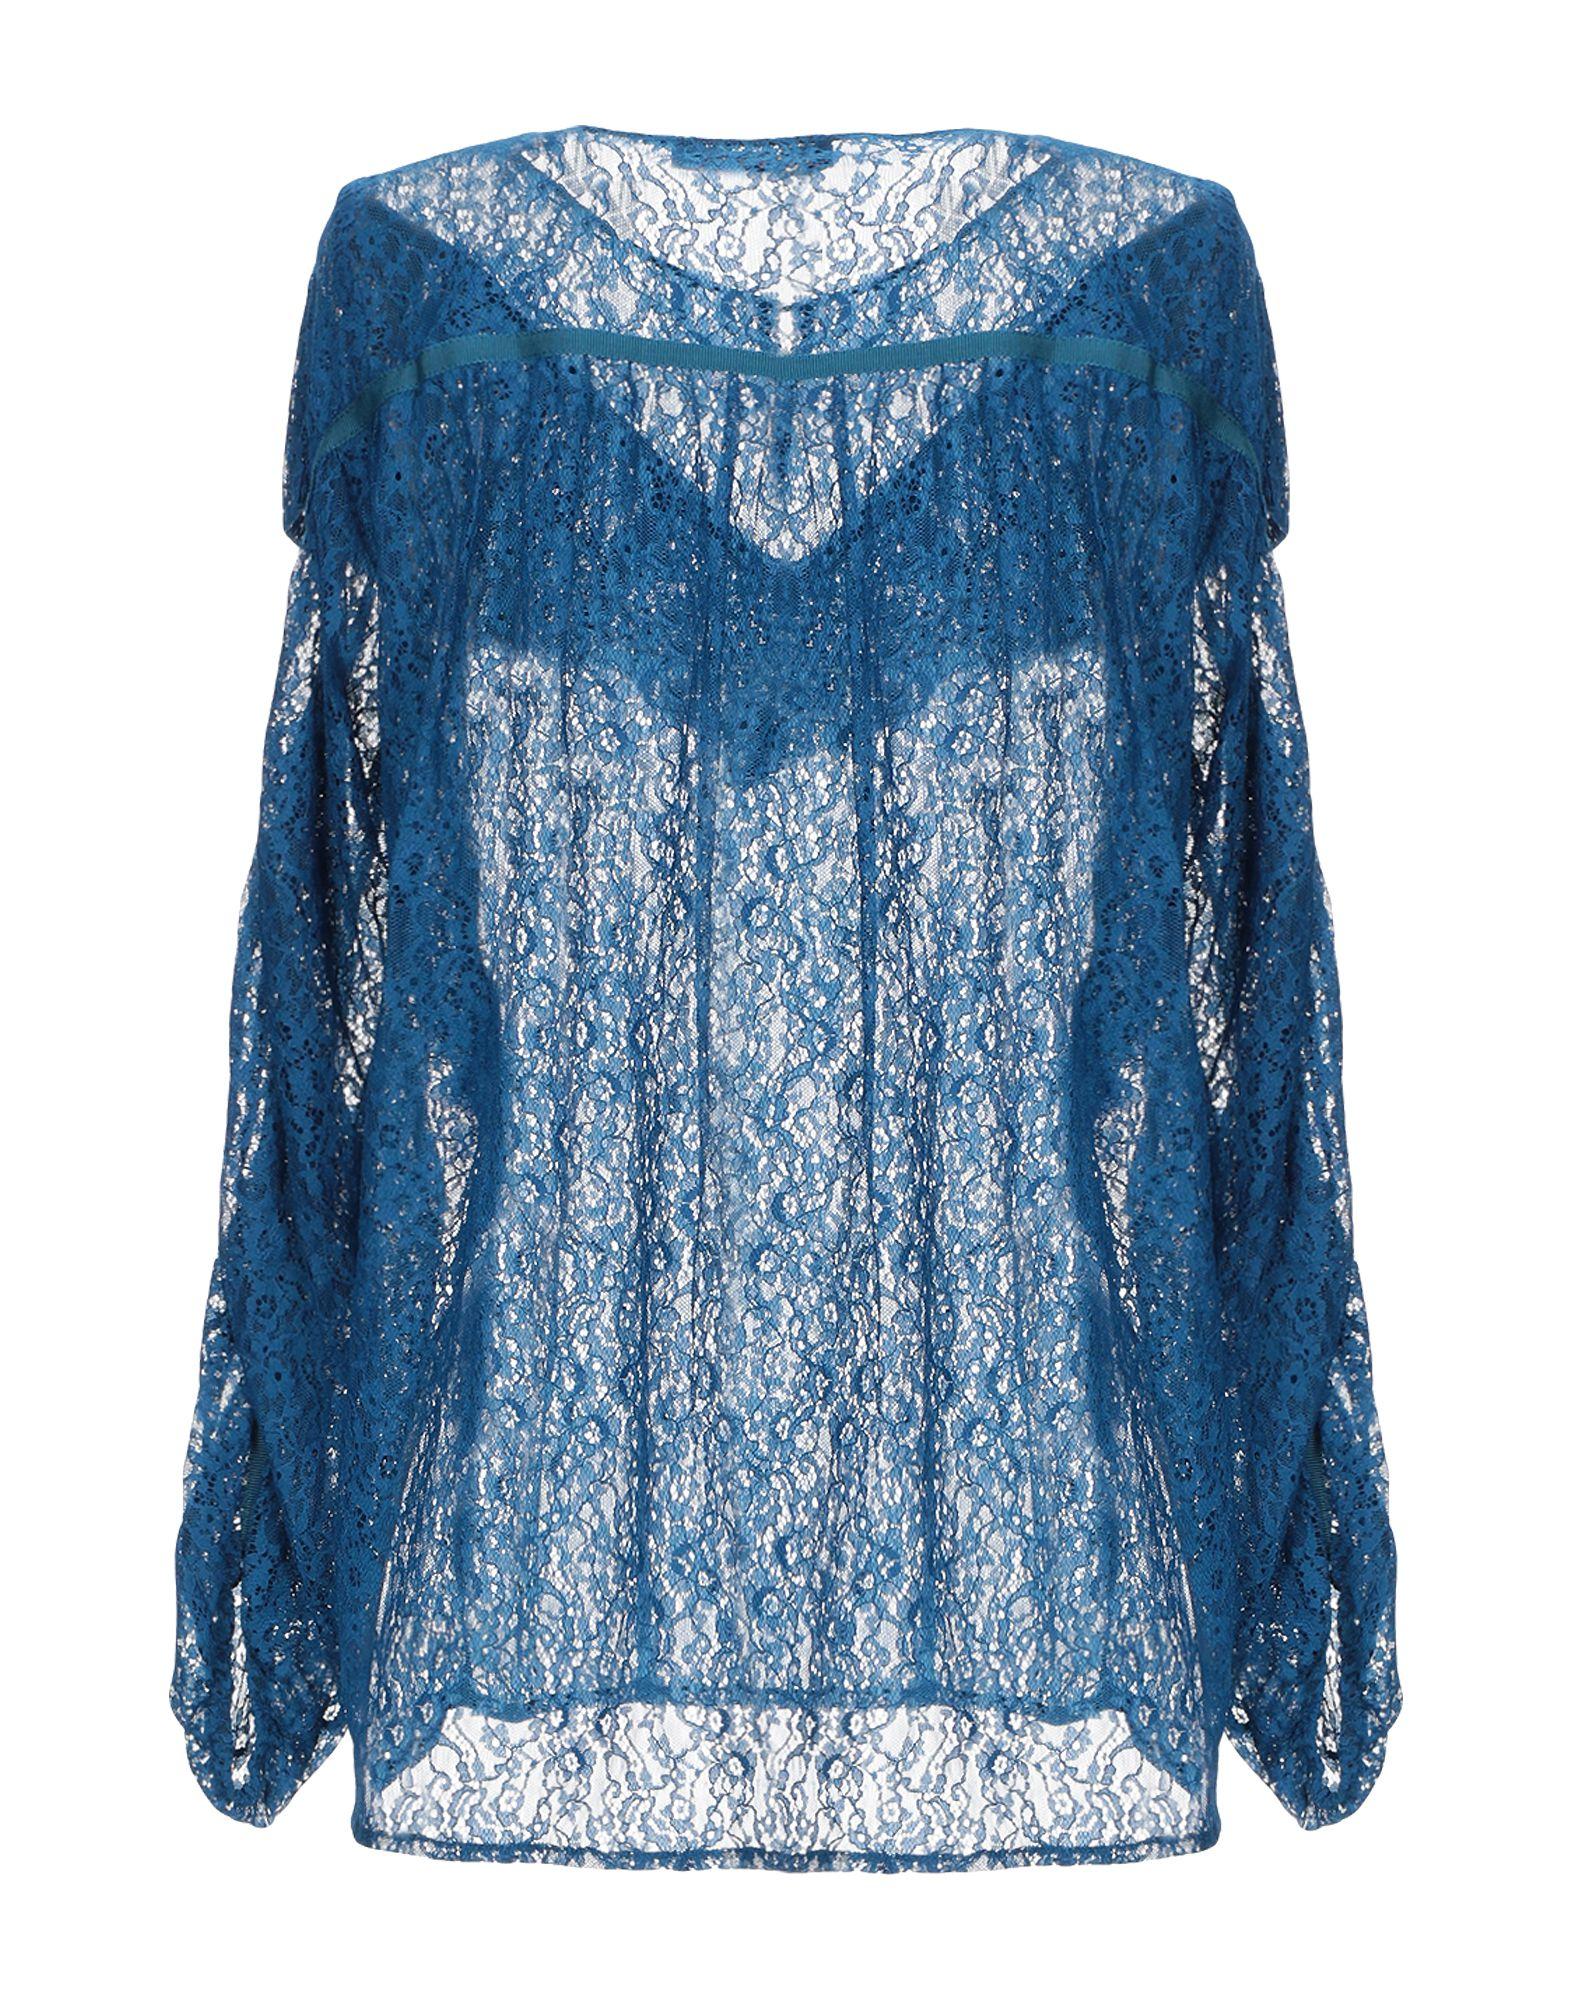 Maje Lace Blouse in Blue - Lyst